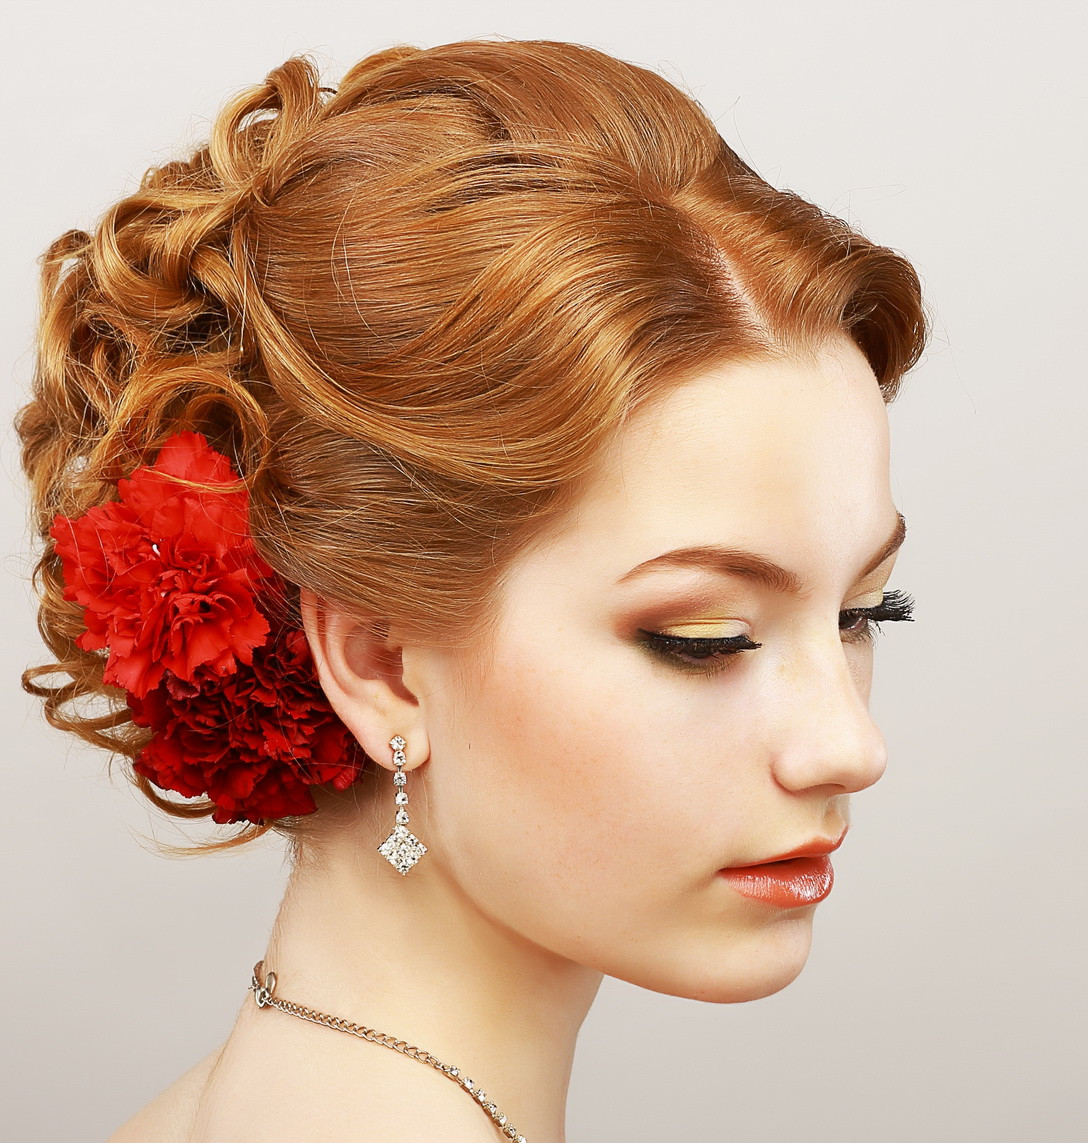 Prom Hairstyles Updos
 16 Easy Prom Hairstyles for Short and Medium Length Hair